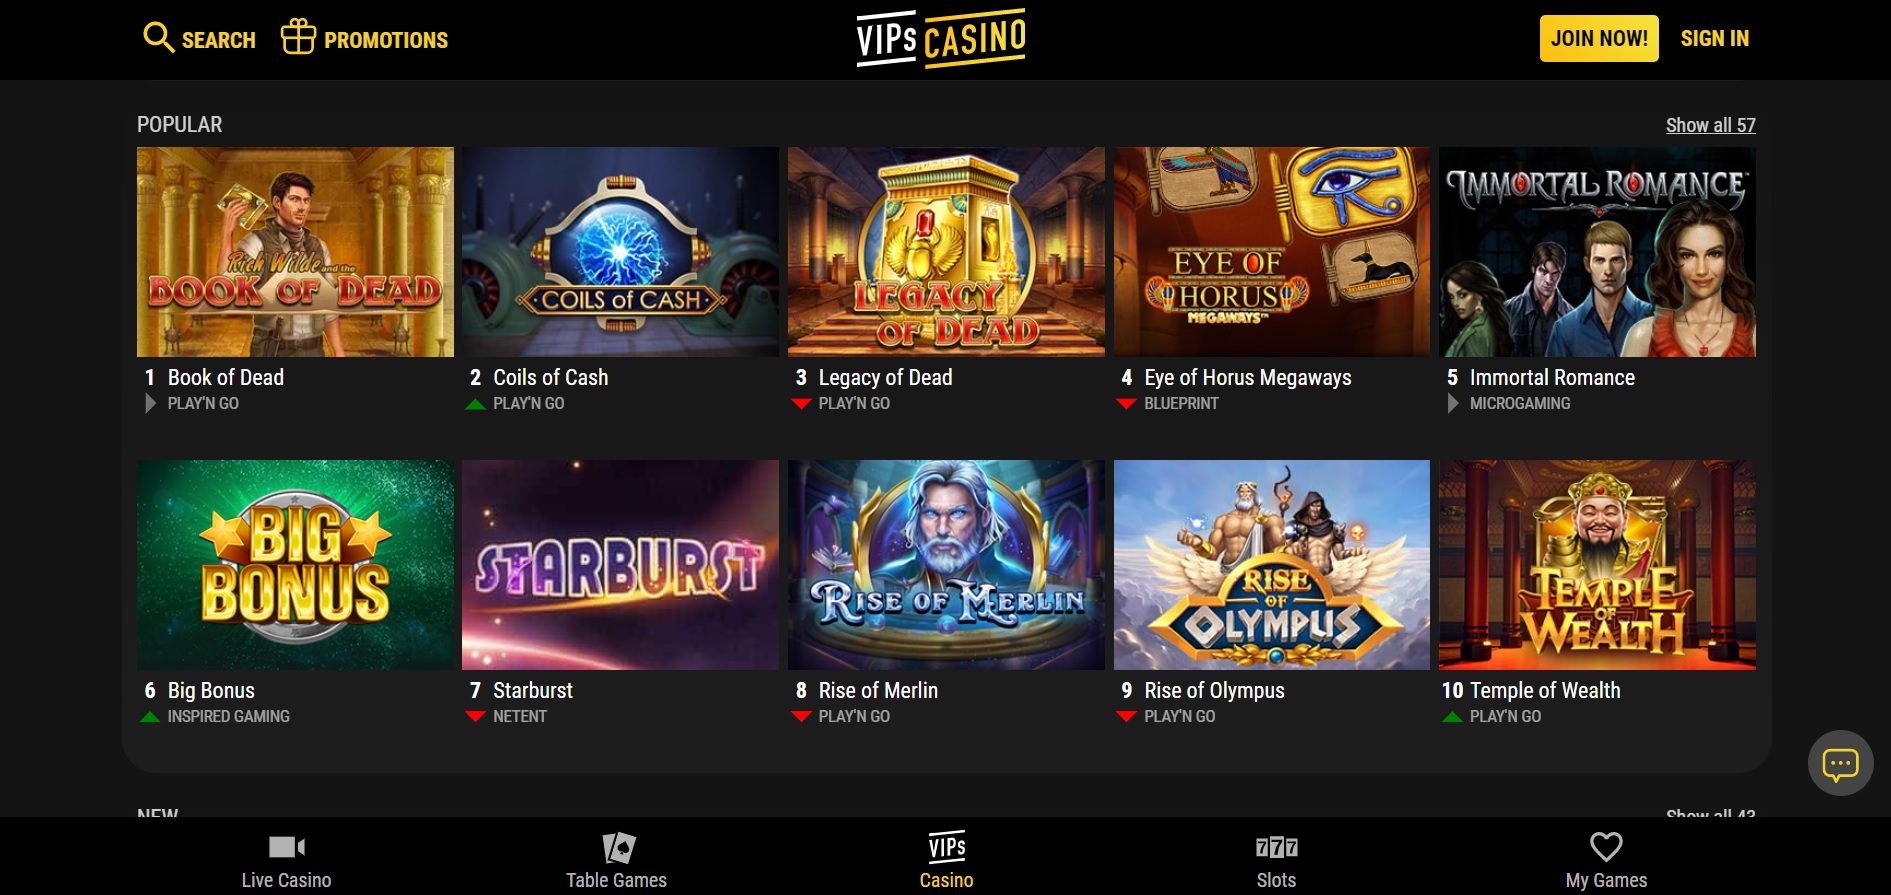 vips casino games and slots 